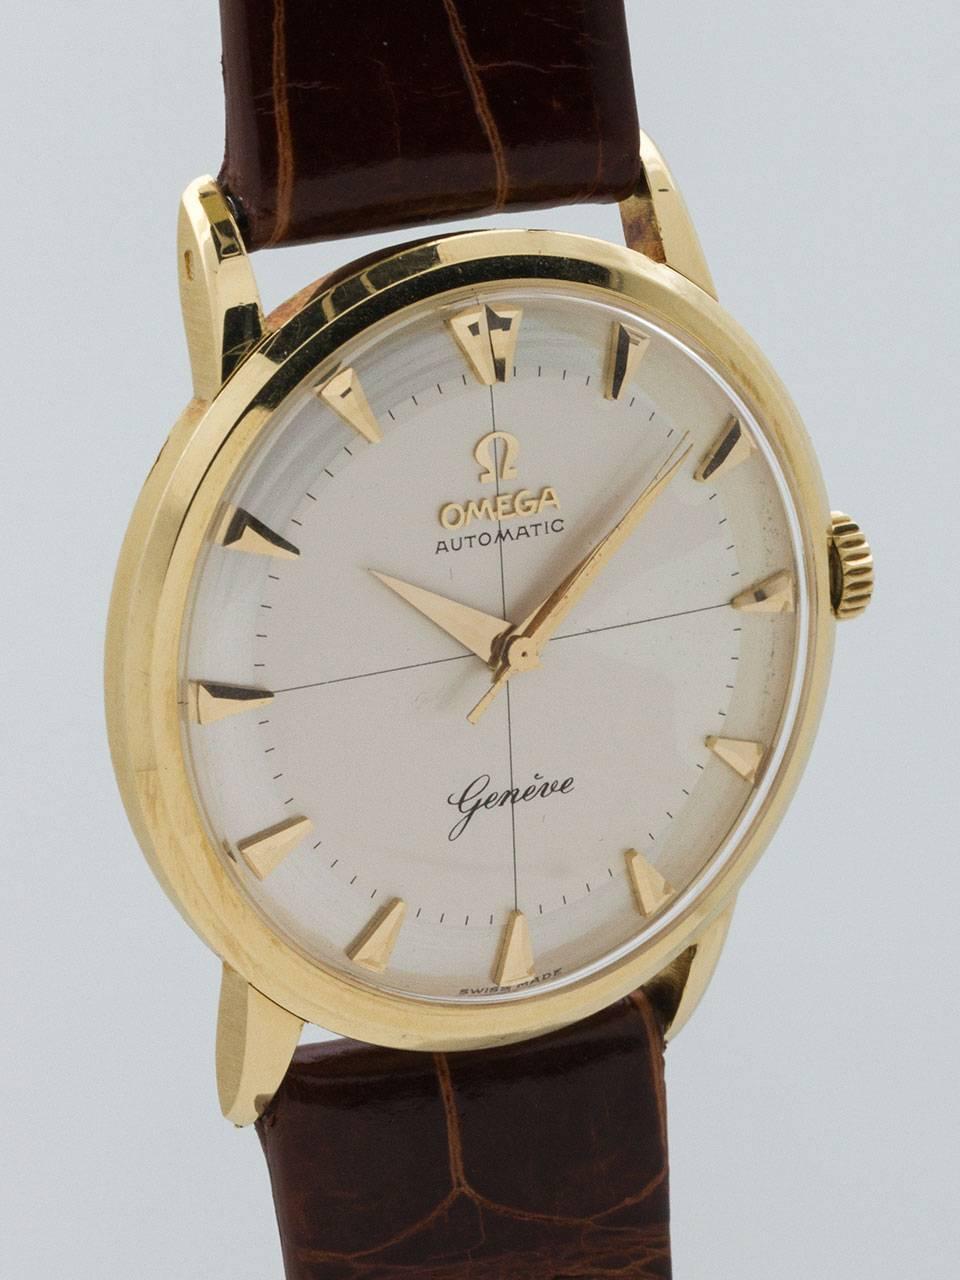 Omega 18K Yellow Gold Geneve case ref #1402 circa 1960. 34 x 40mm case with acrylic crystal and singed Omega crown. Gorgeous and original silver satin dial with cross hairs pattern, broad arrow markers, dauphine hands and applied Omega symbol.